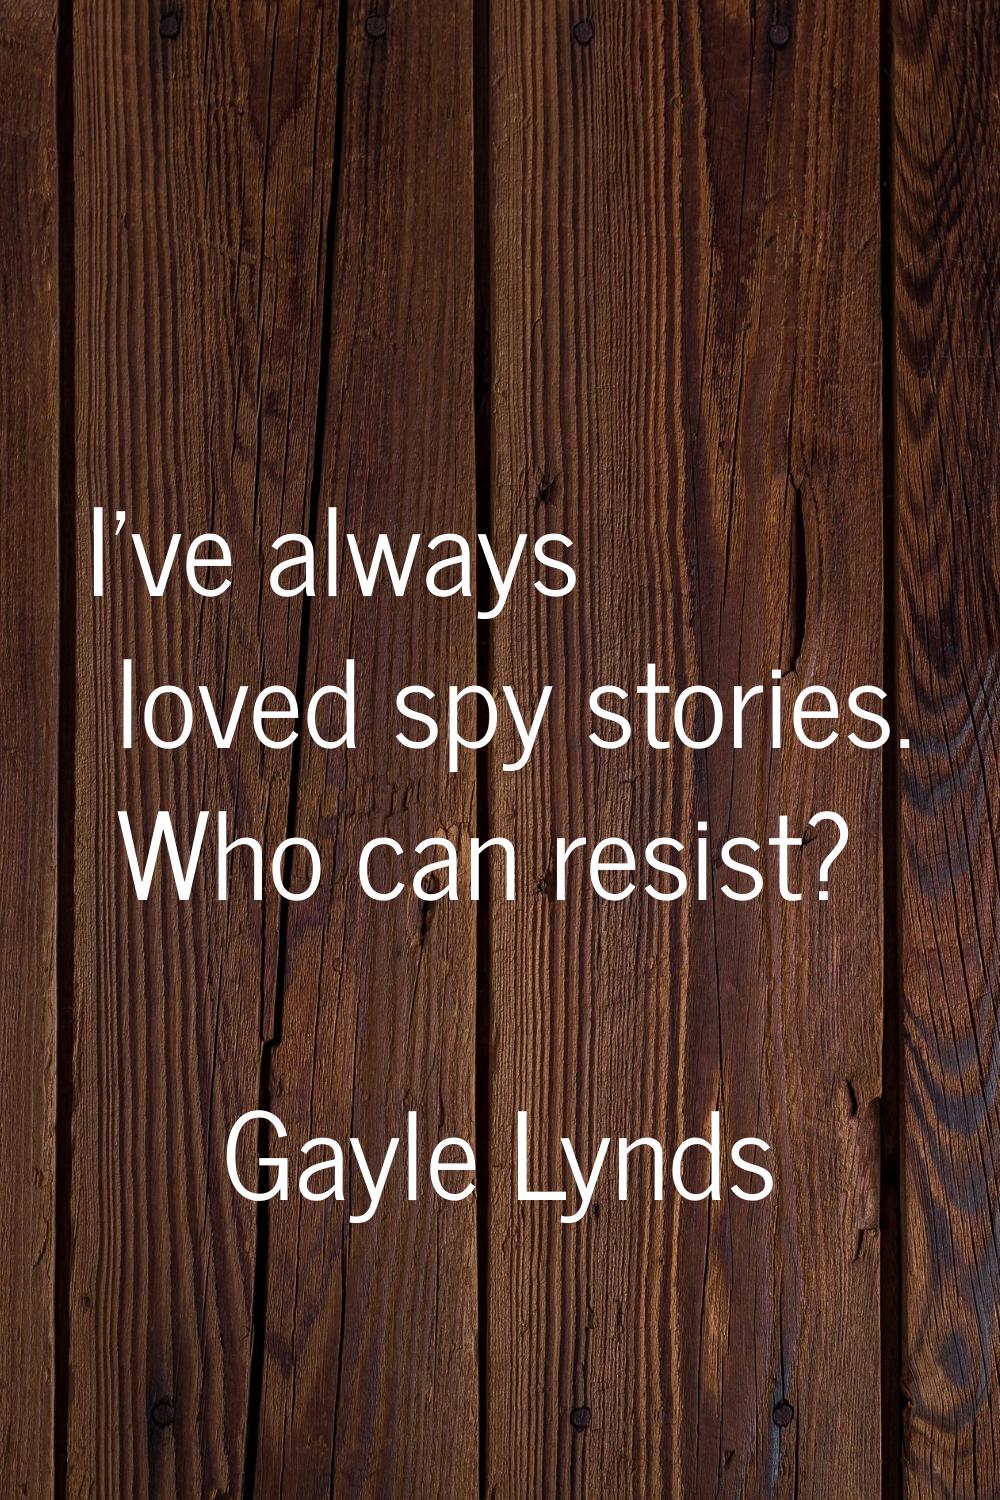 I've always loved spy stories. Who can resist?